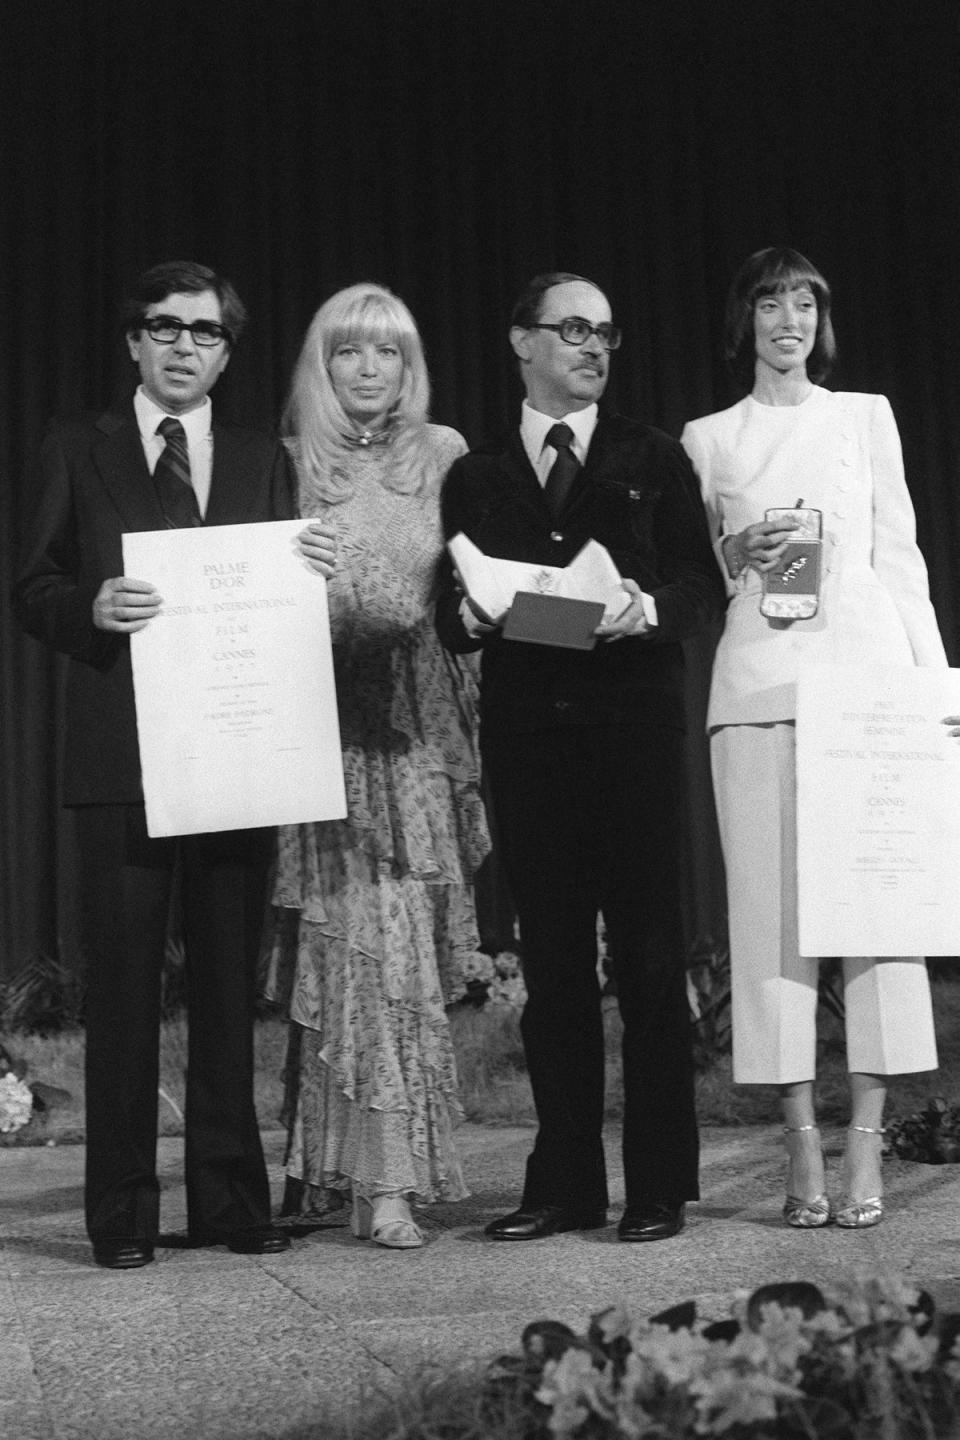 Duvall (R) in 1977, alongside,Paolo (L) and Vittorio Taviani and actress Monica Vitti, at the Cannes Film Festival where she won Best Actress (AFP via Getty Images)